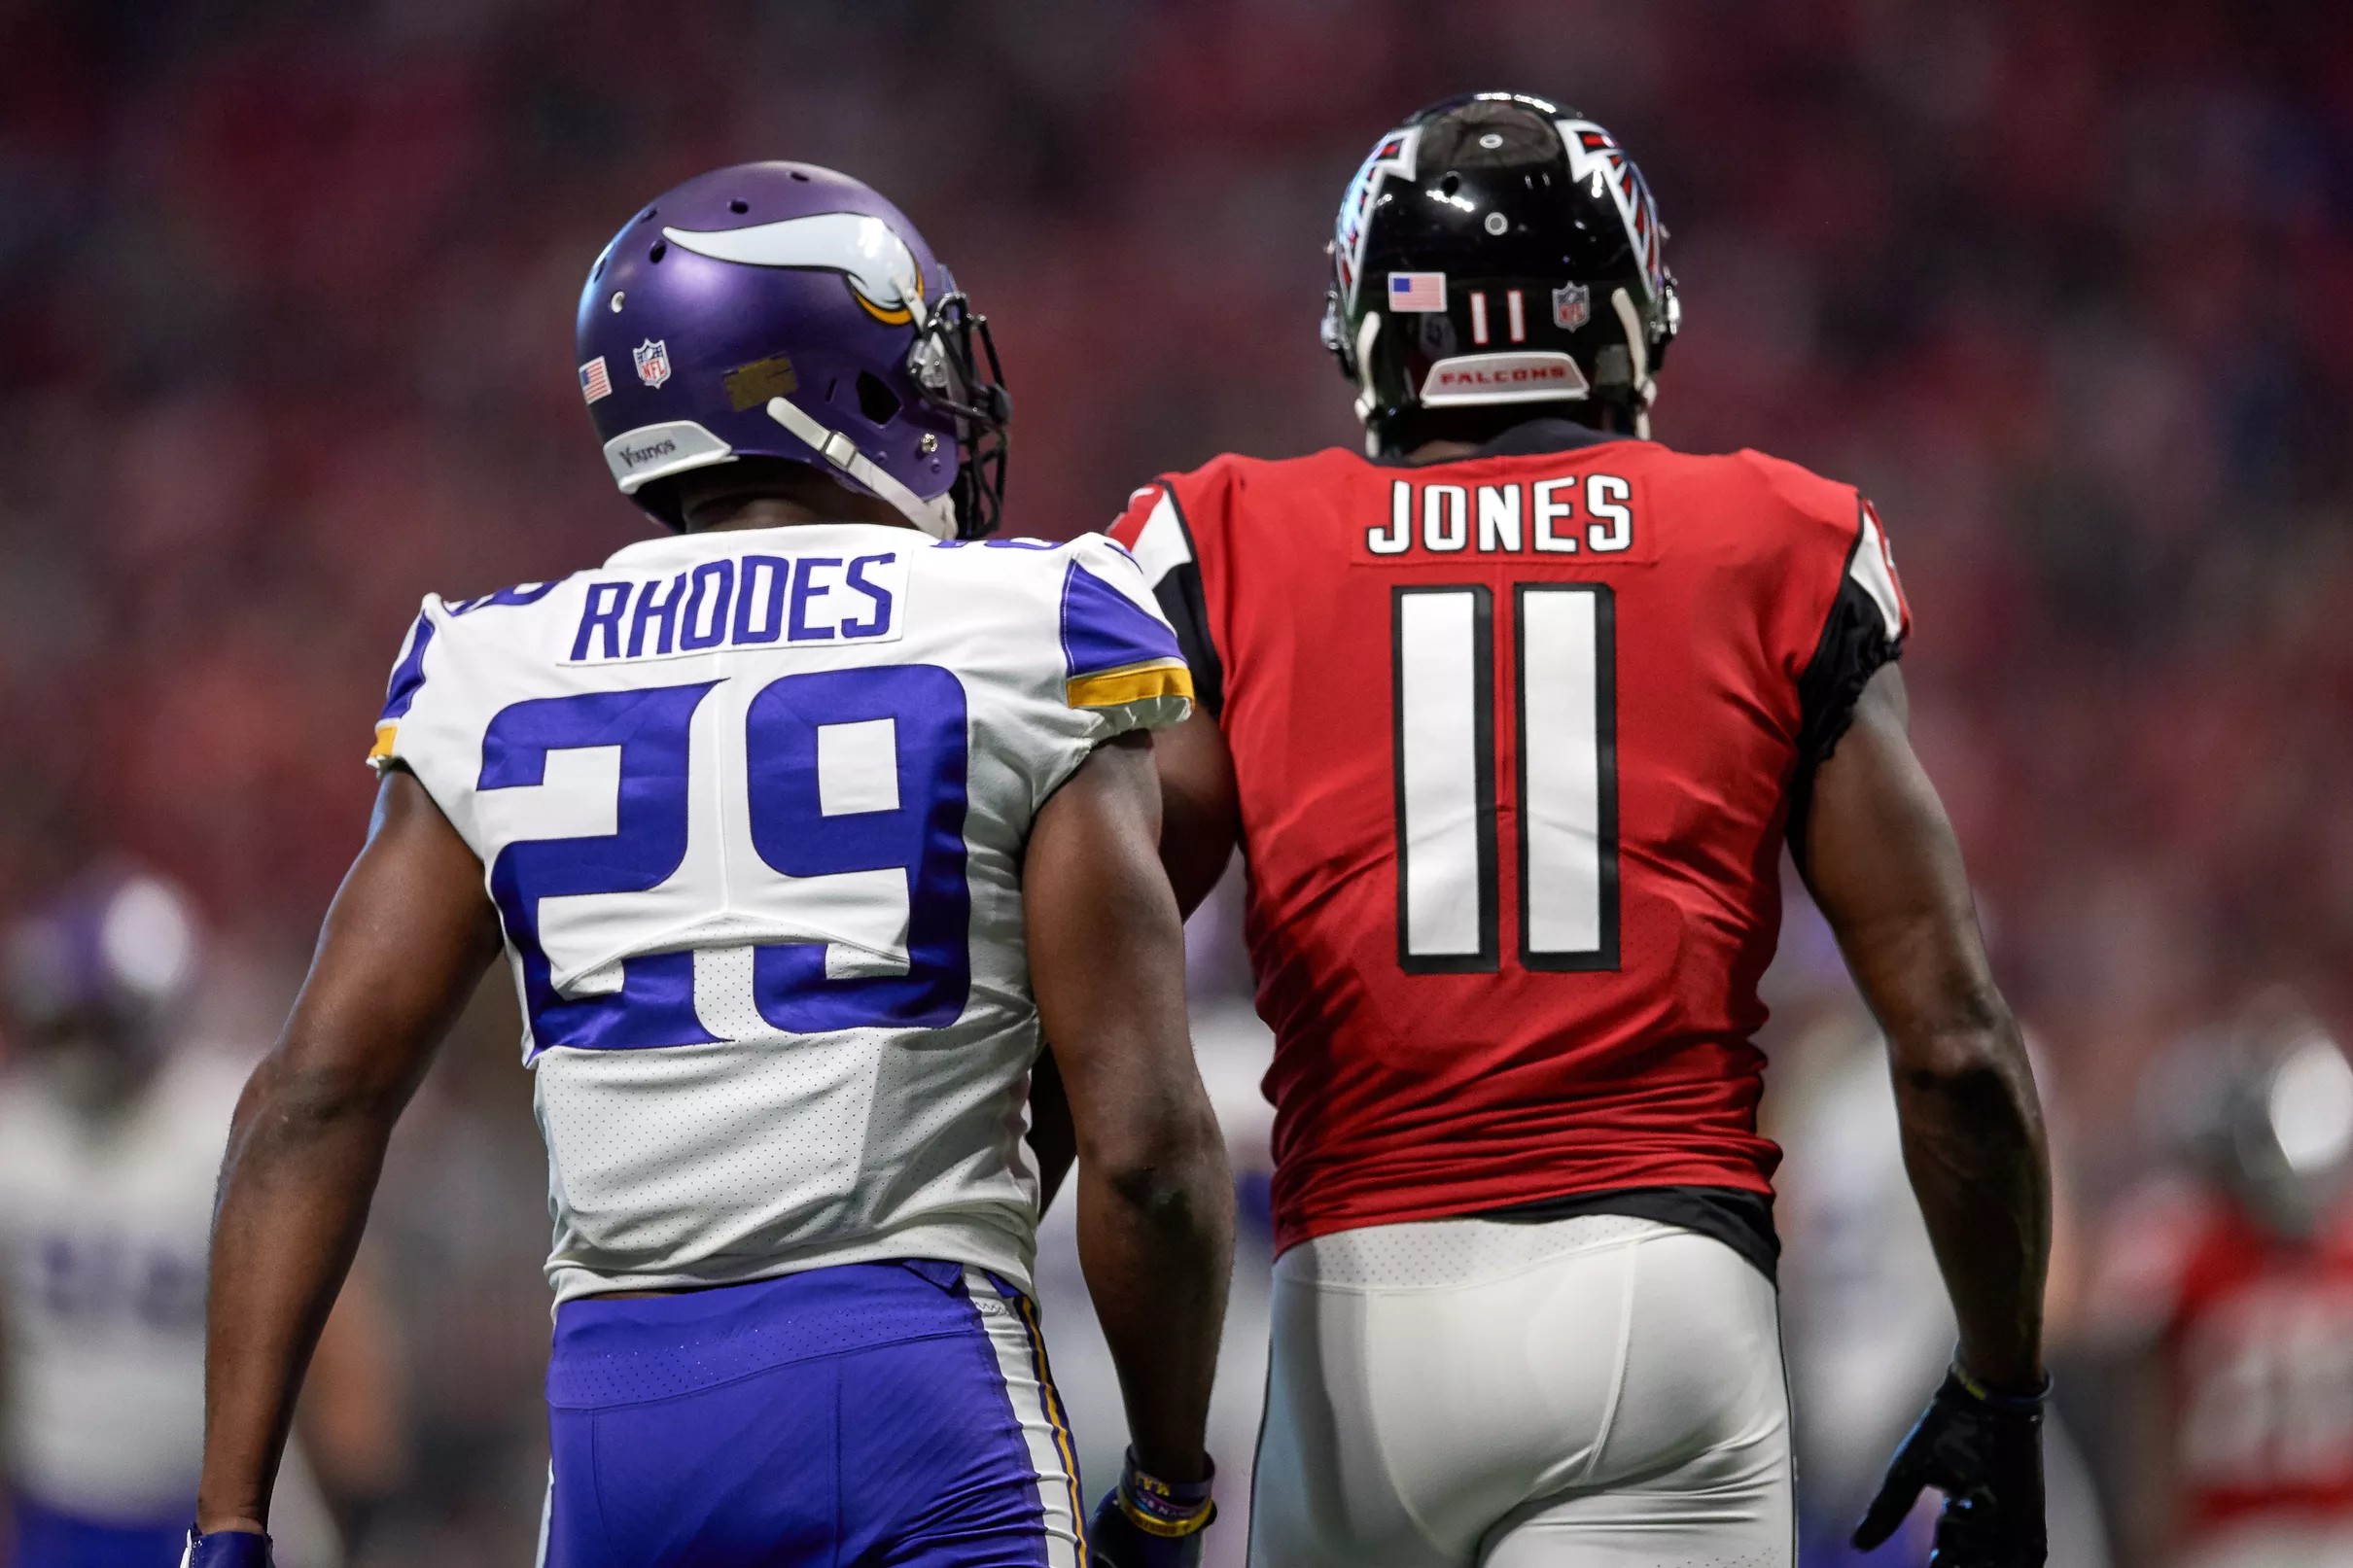 Vikings vs. Falcons Things to Look For